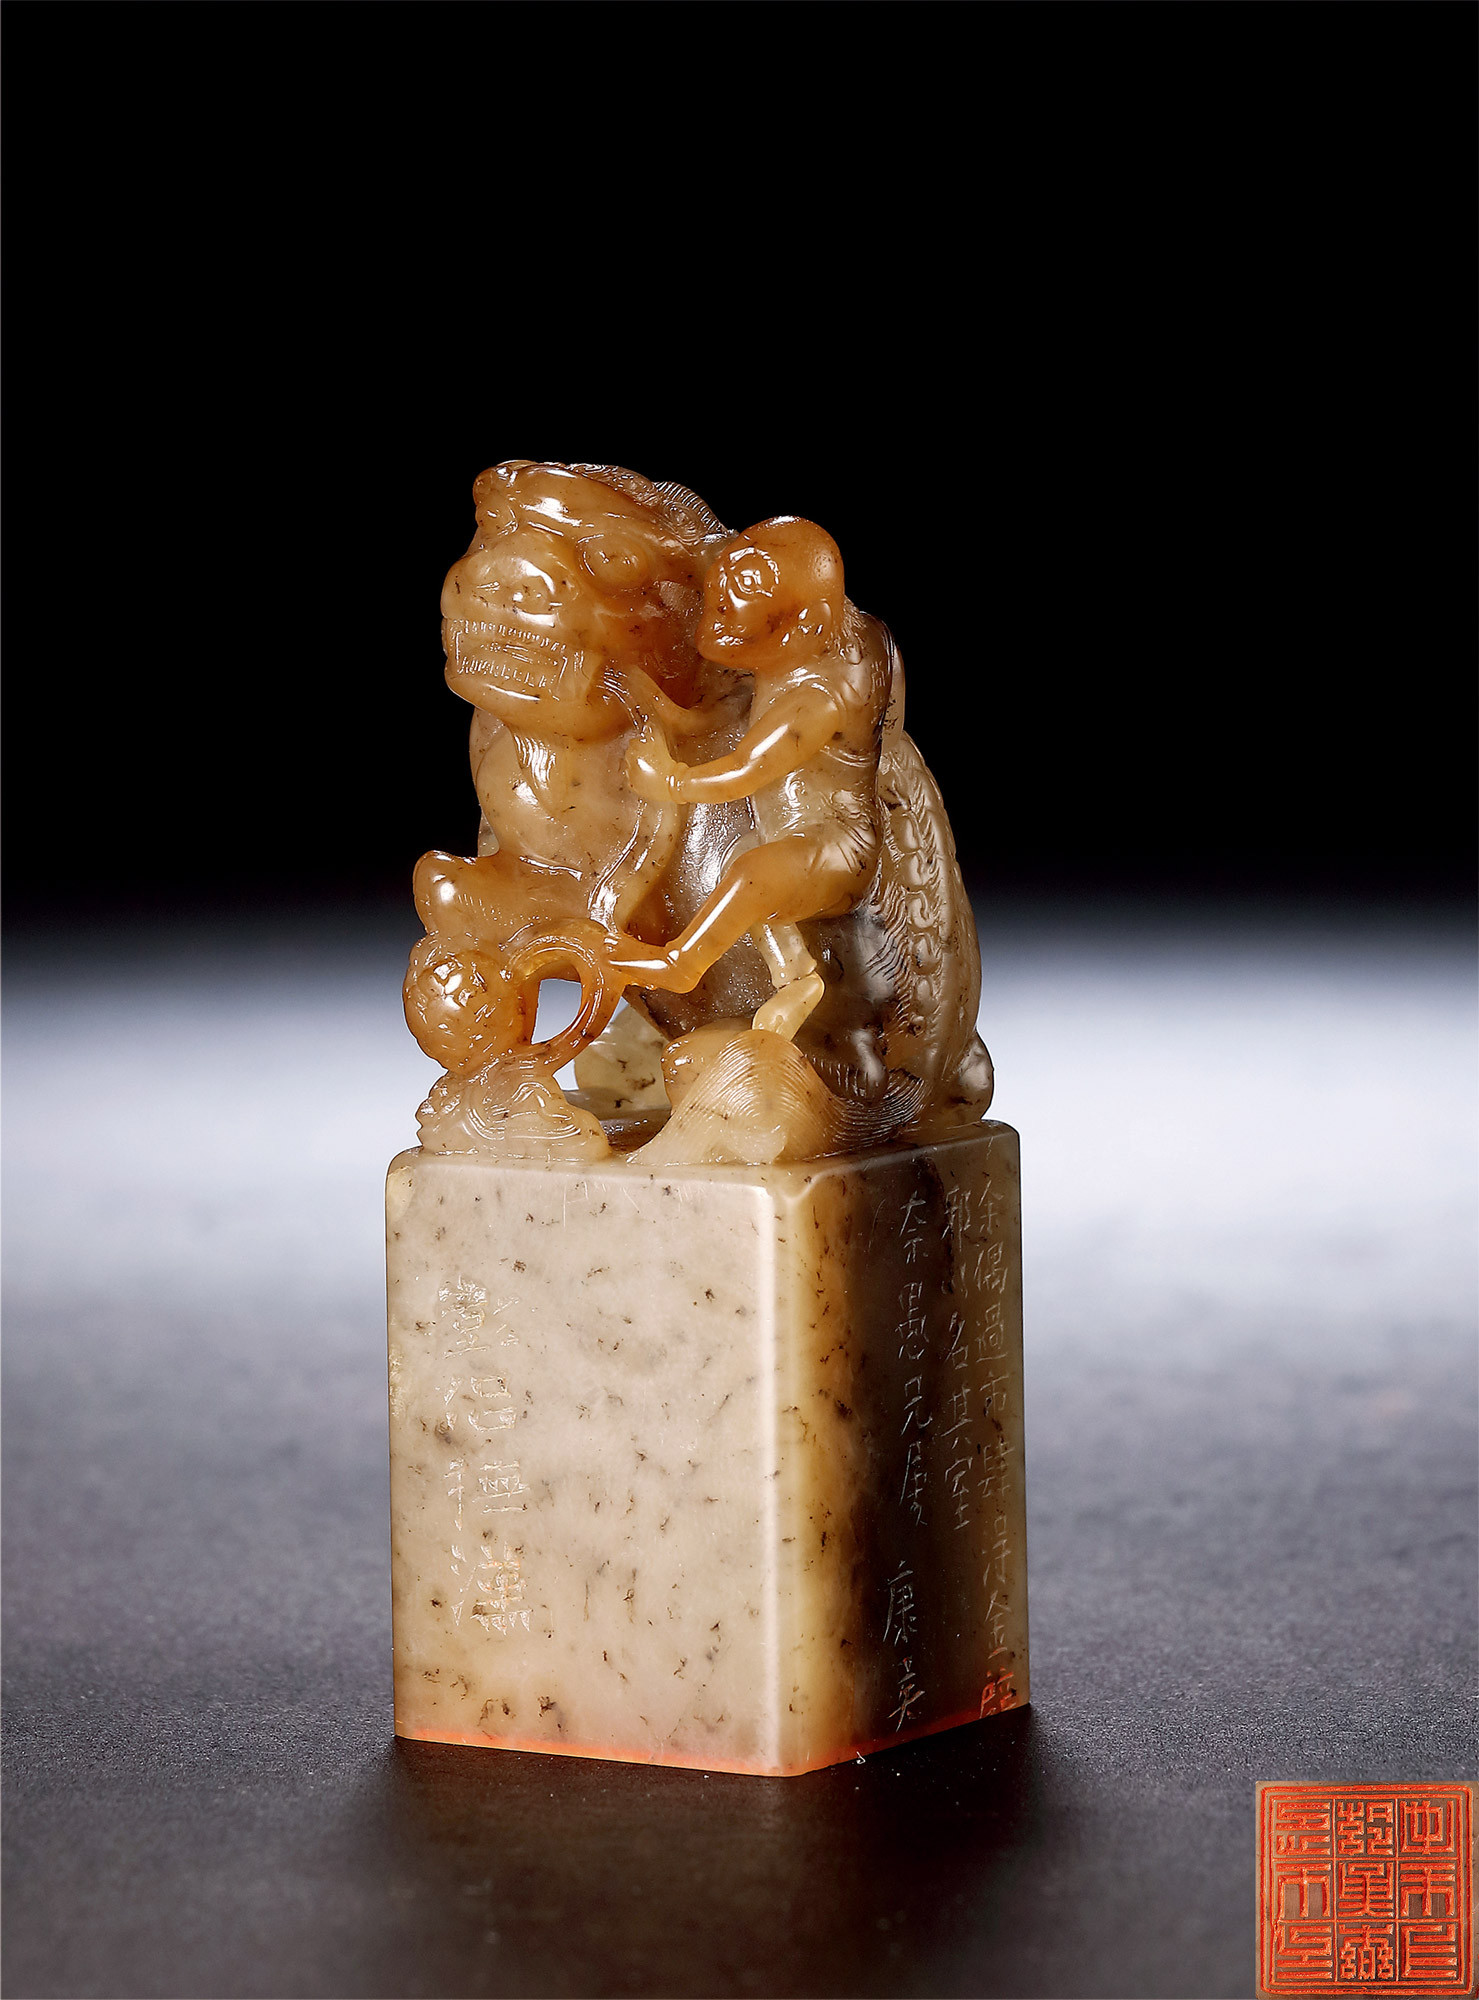 AN AGATE‘FOREIGNER AND LION’ SEAL, MADE BY ZHOU JUNSHANG AND INSCRIBED BY HUANG GAONIAN FOR TANG SHAOYUAN